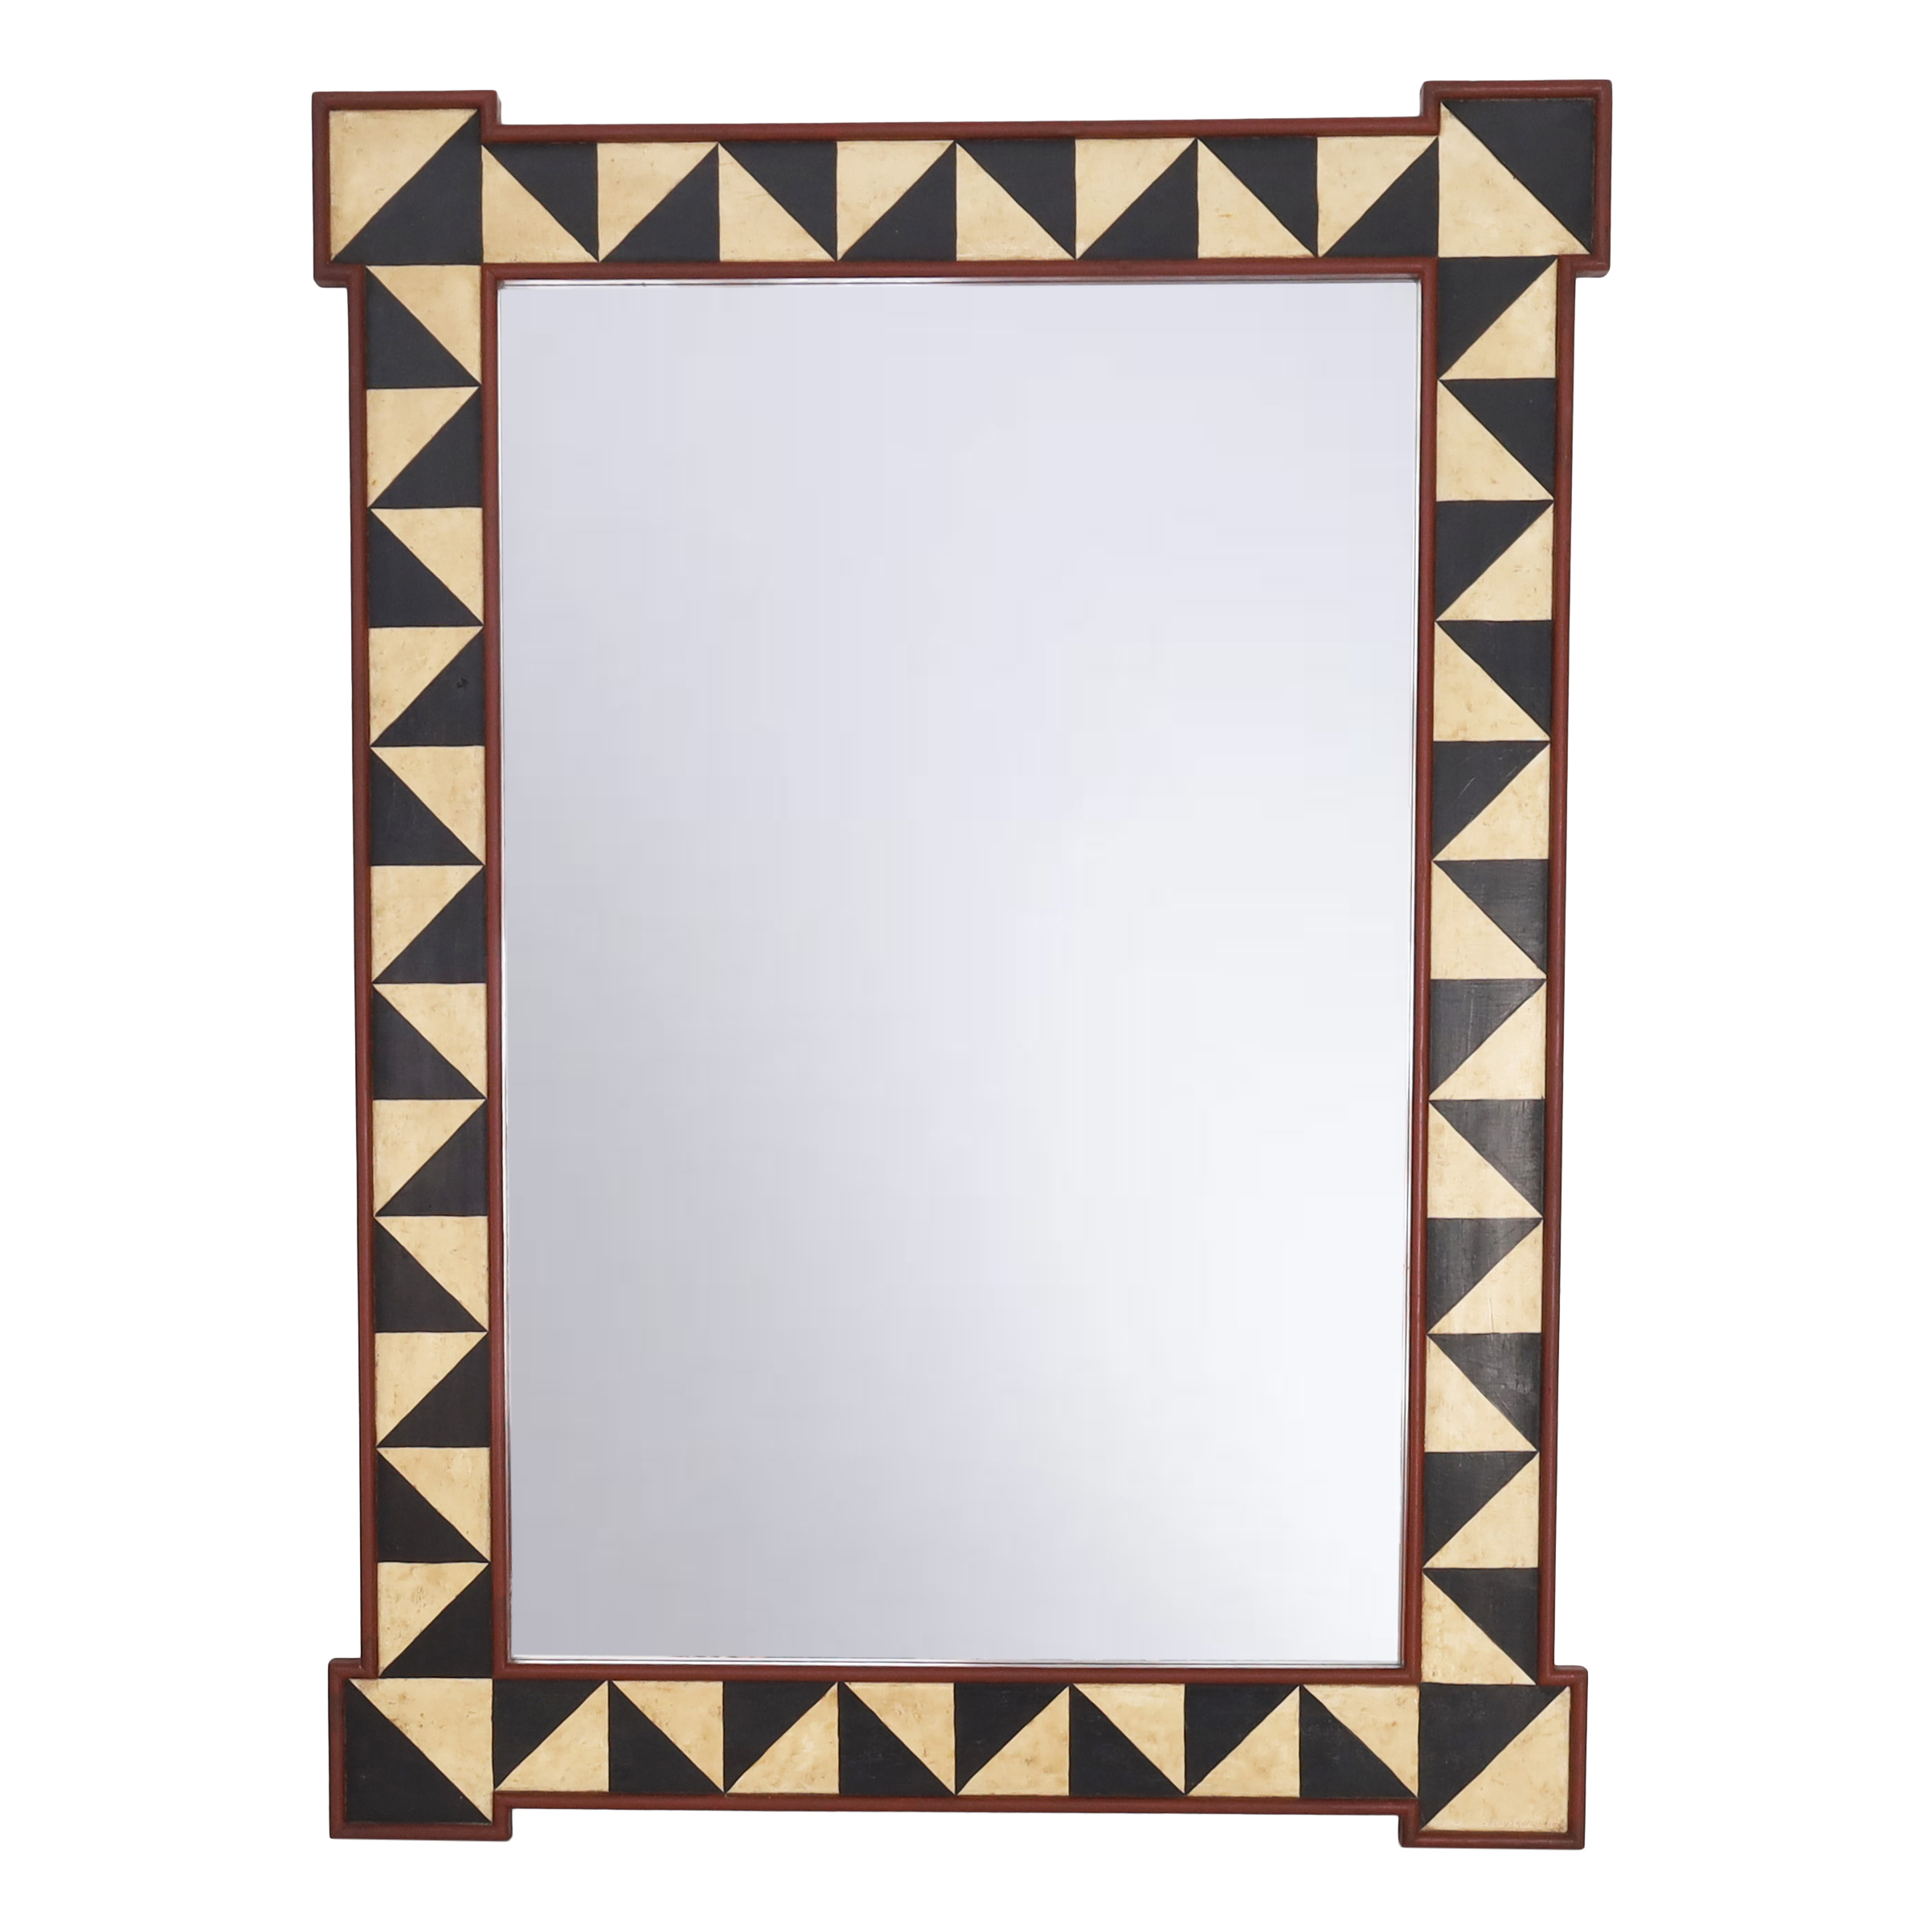 Pair of Large Wall Mirrors with Hand Painted Frames